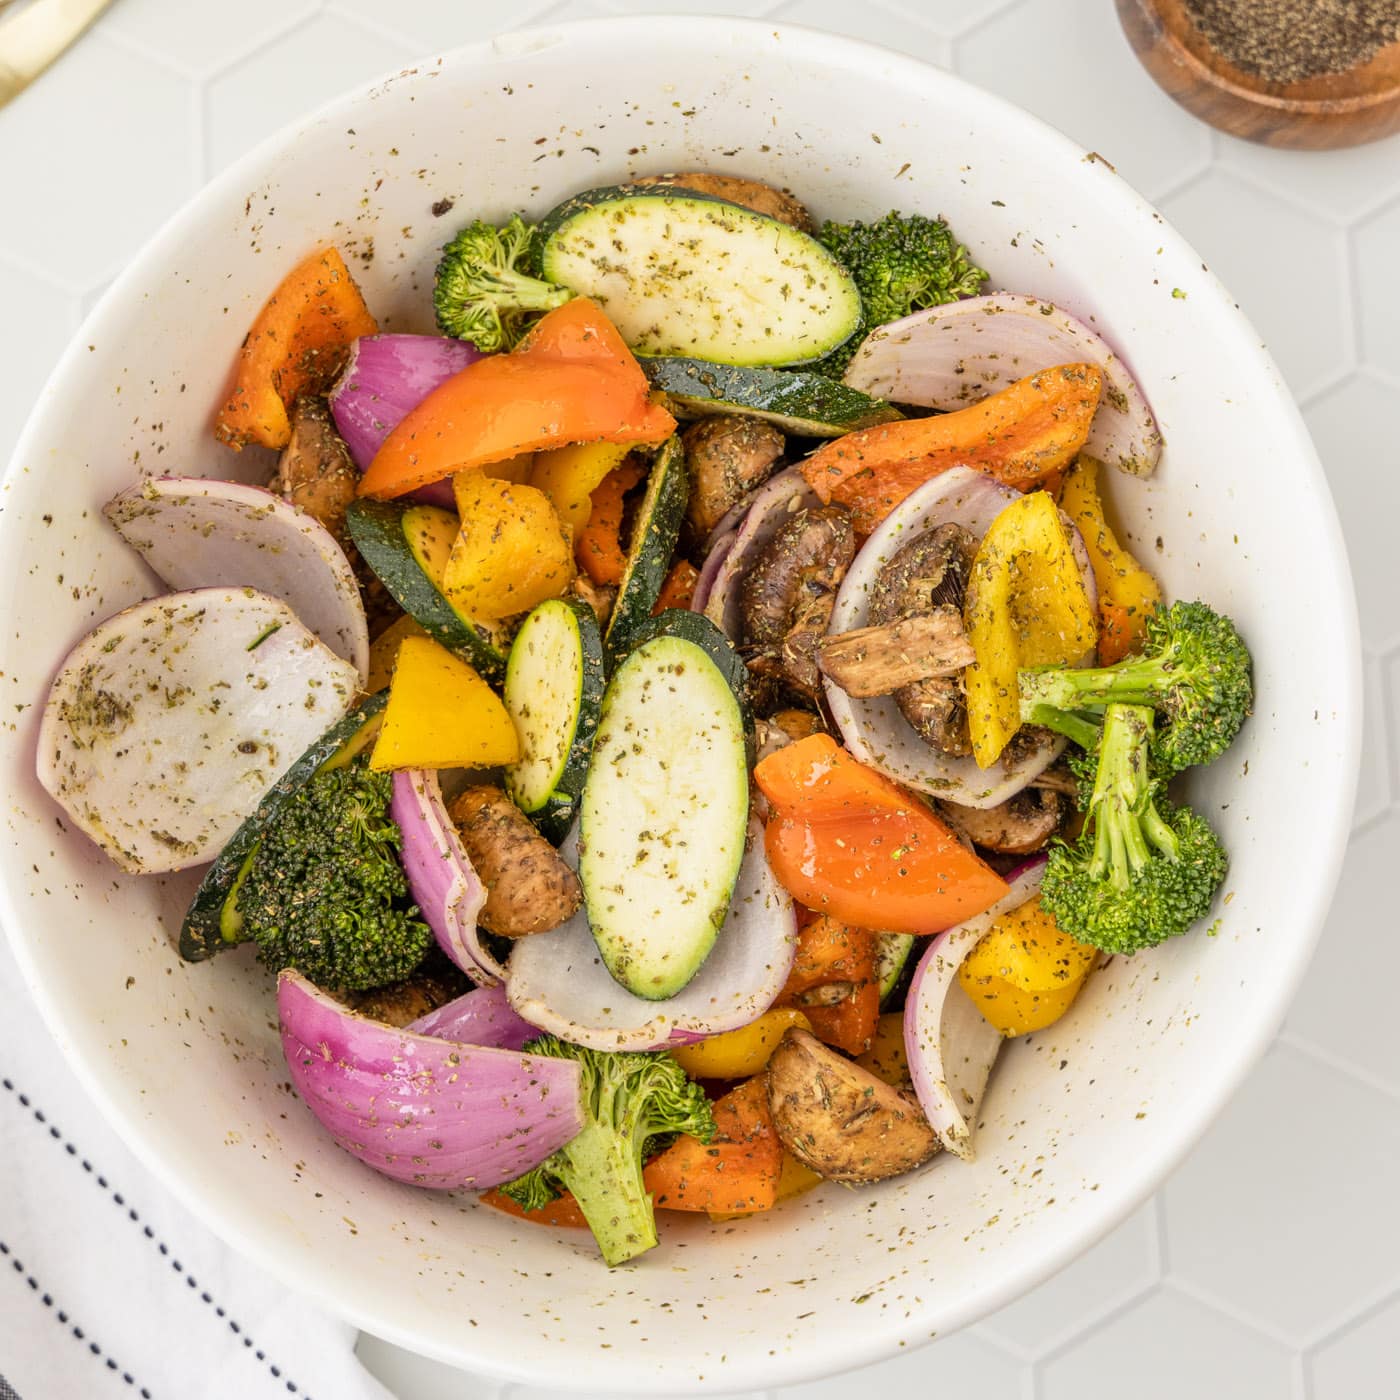 grilled vegetables tossed with olive oil and seasoning in a bowl